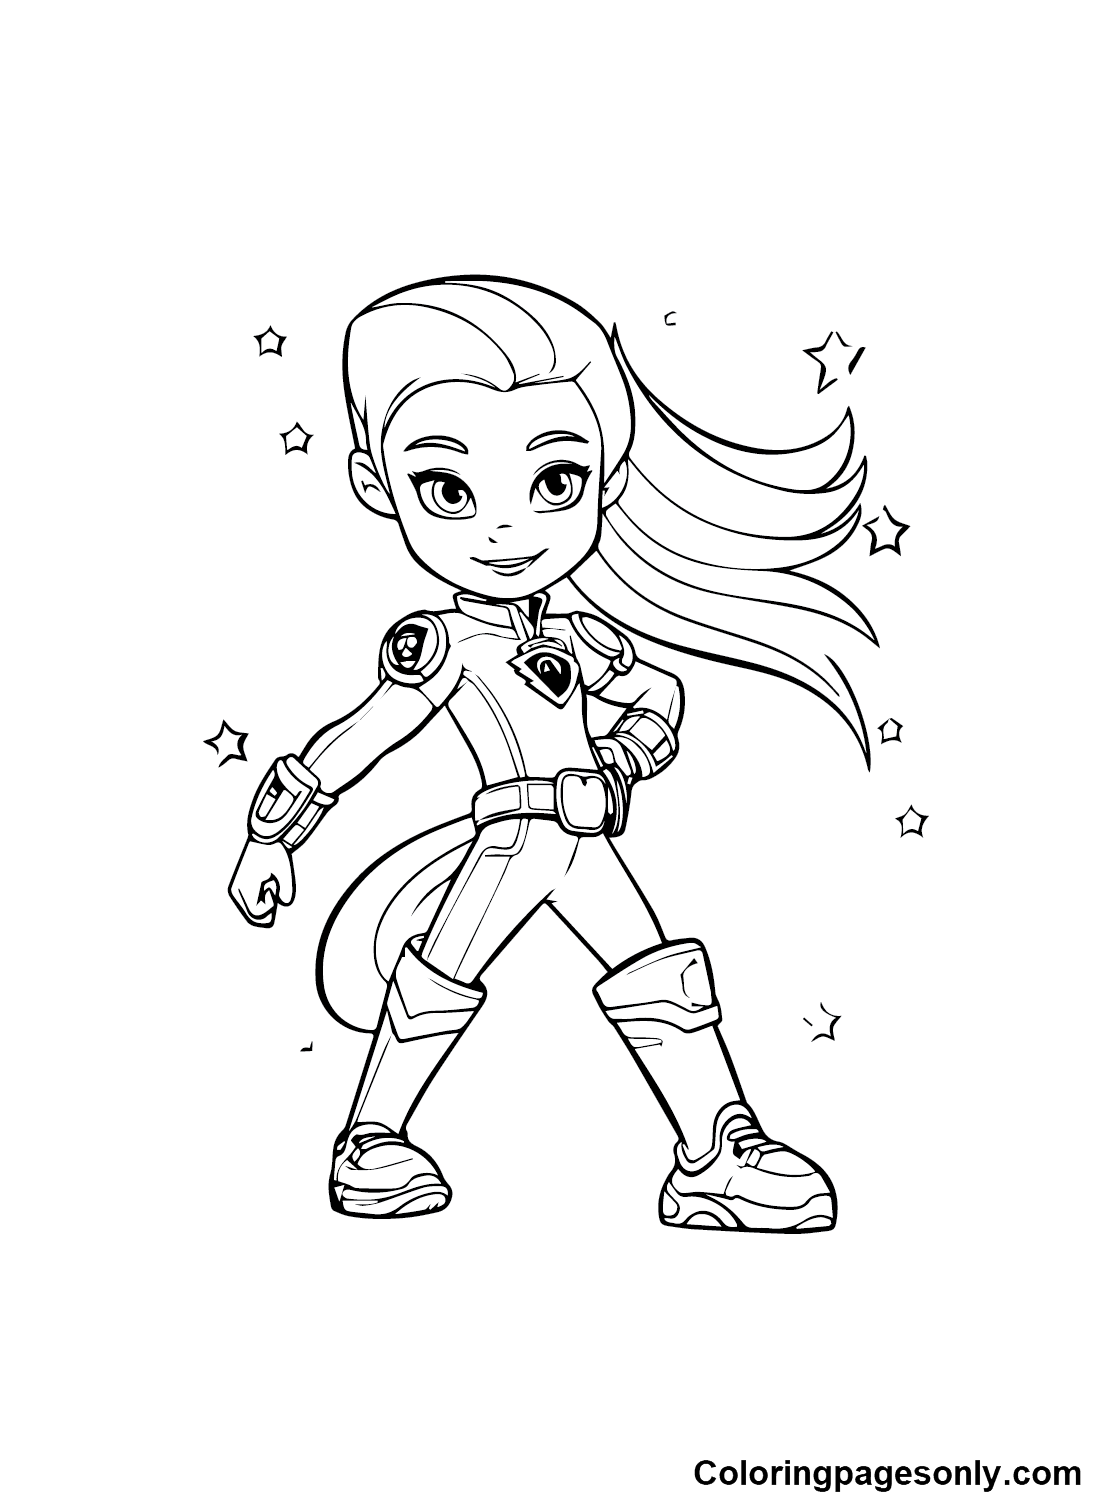 Amazing Rainbow Rangers Coloring Pages